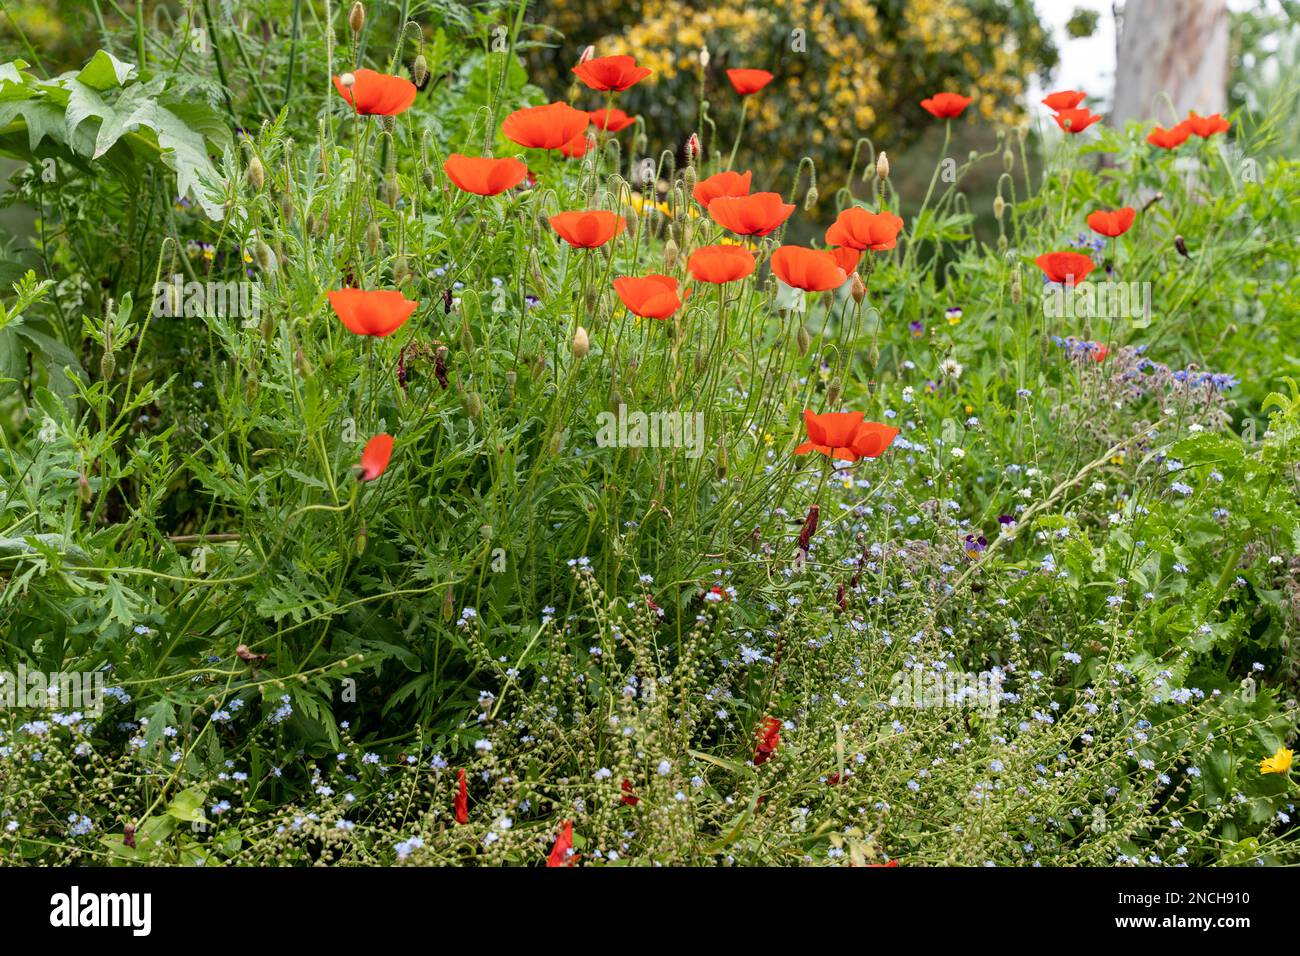 Bright red poppies in a colourful cottage garden Stock Photo